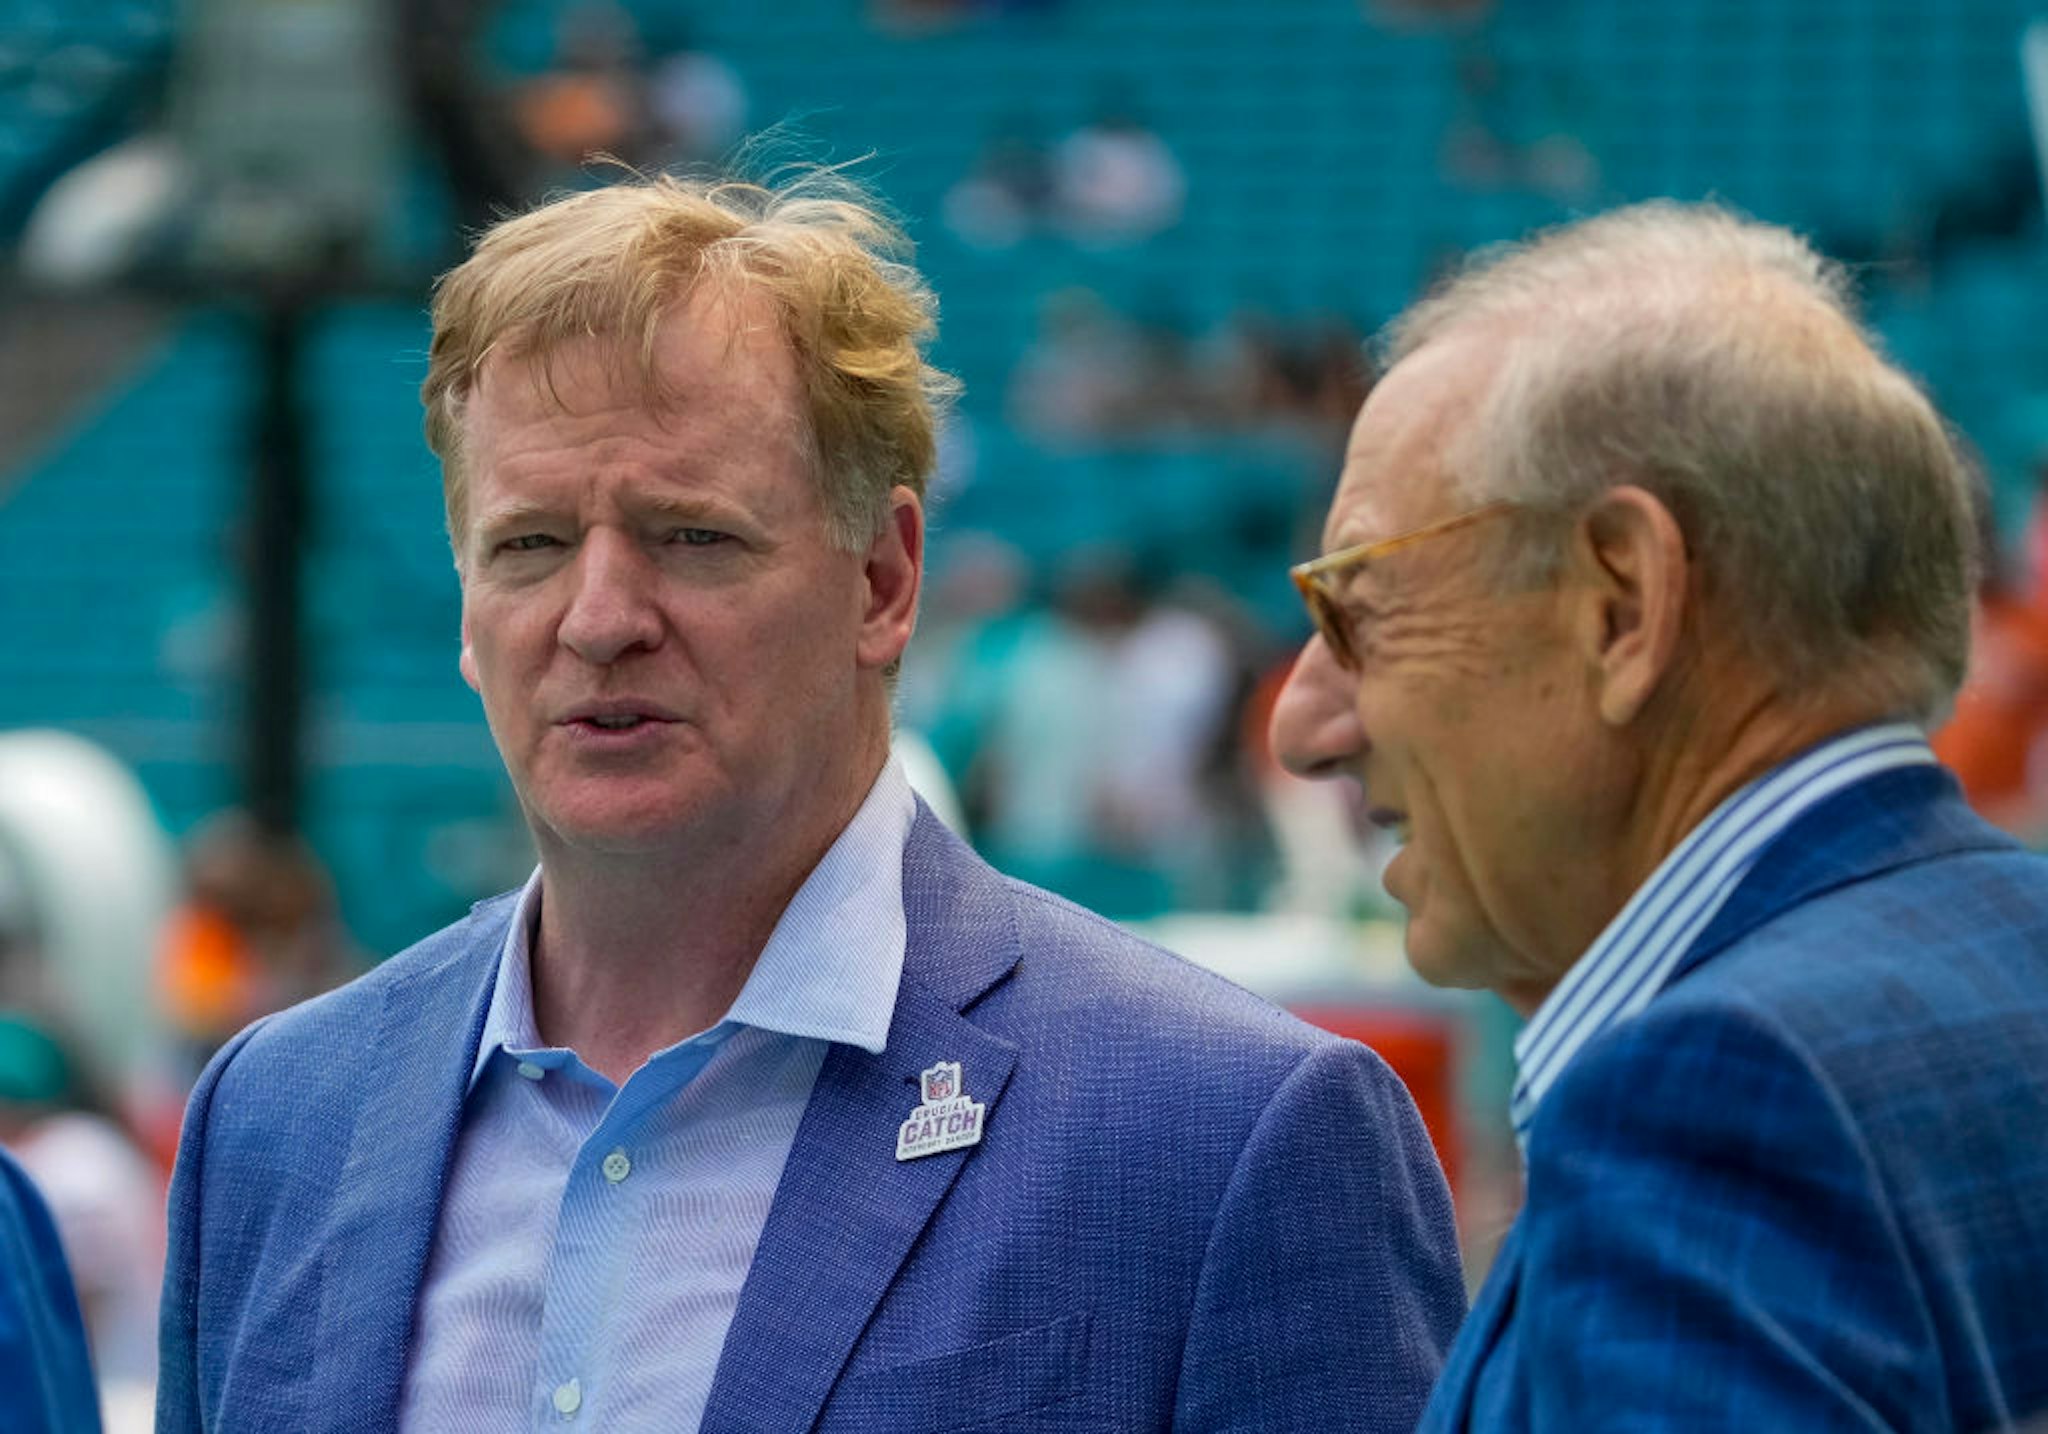 MIAMI GARDENS, FL - OCTOBER 03: NFL Commissioner Roger Goodell during the NFL Football match between the Miami Dolphins and Indianapolis Colts on October 3rd, 2021 at Hard Rock Stadium in Miami, FL. (Photo by Andrew Bershaw/Icon Sportswire via Getty Images)